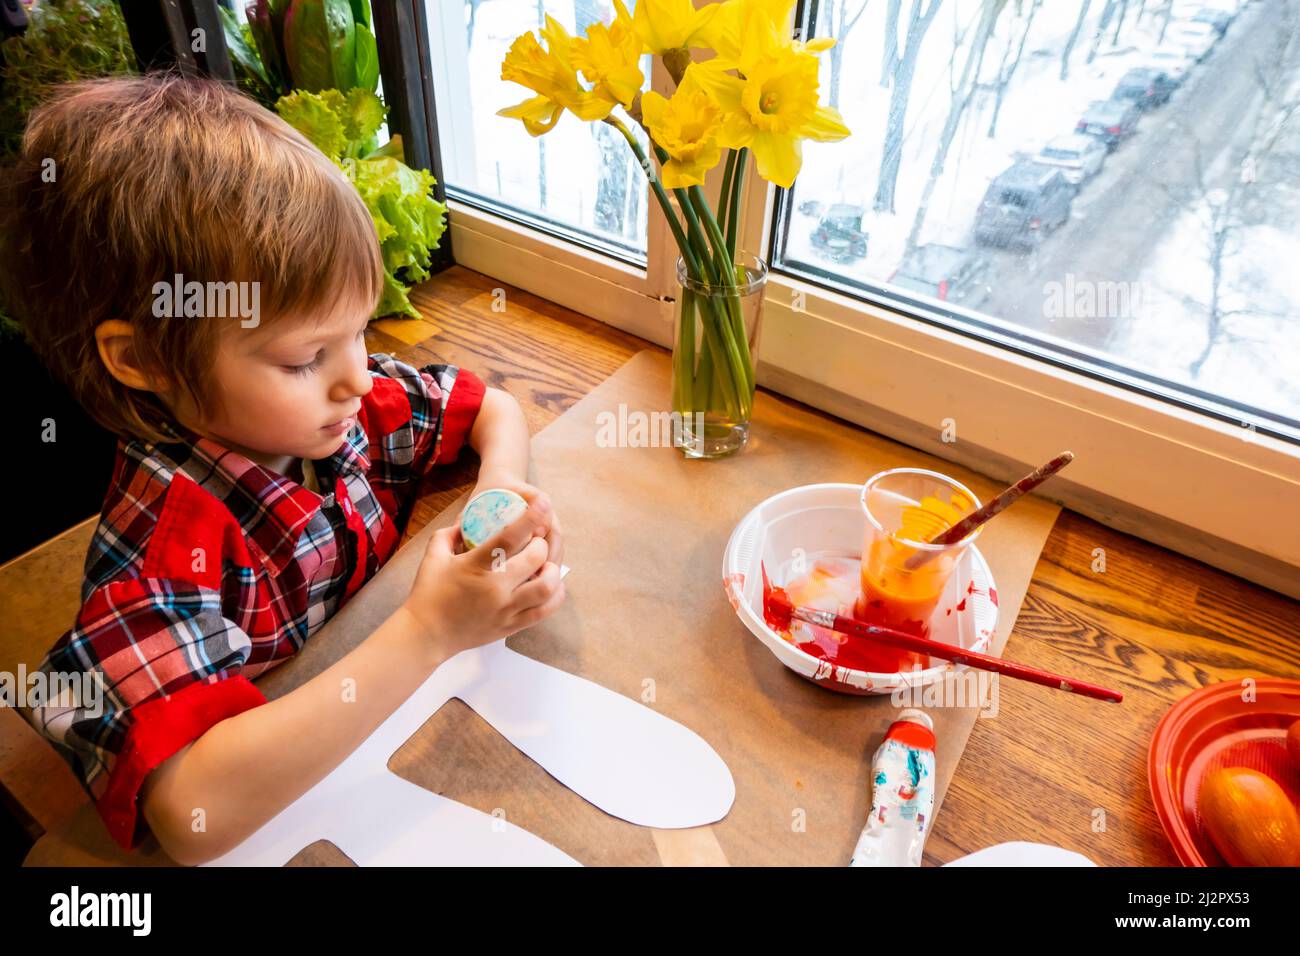 boy drawing the ears of a handmade Easter bunny made of cardboard. Preparation for the celebration of the Easter holiday. Stock Photo